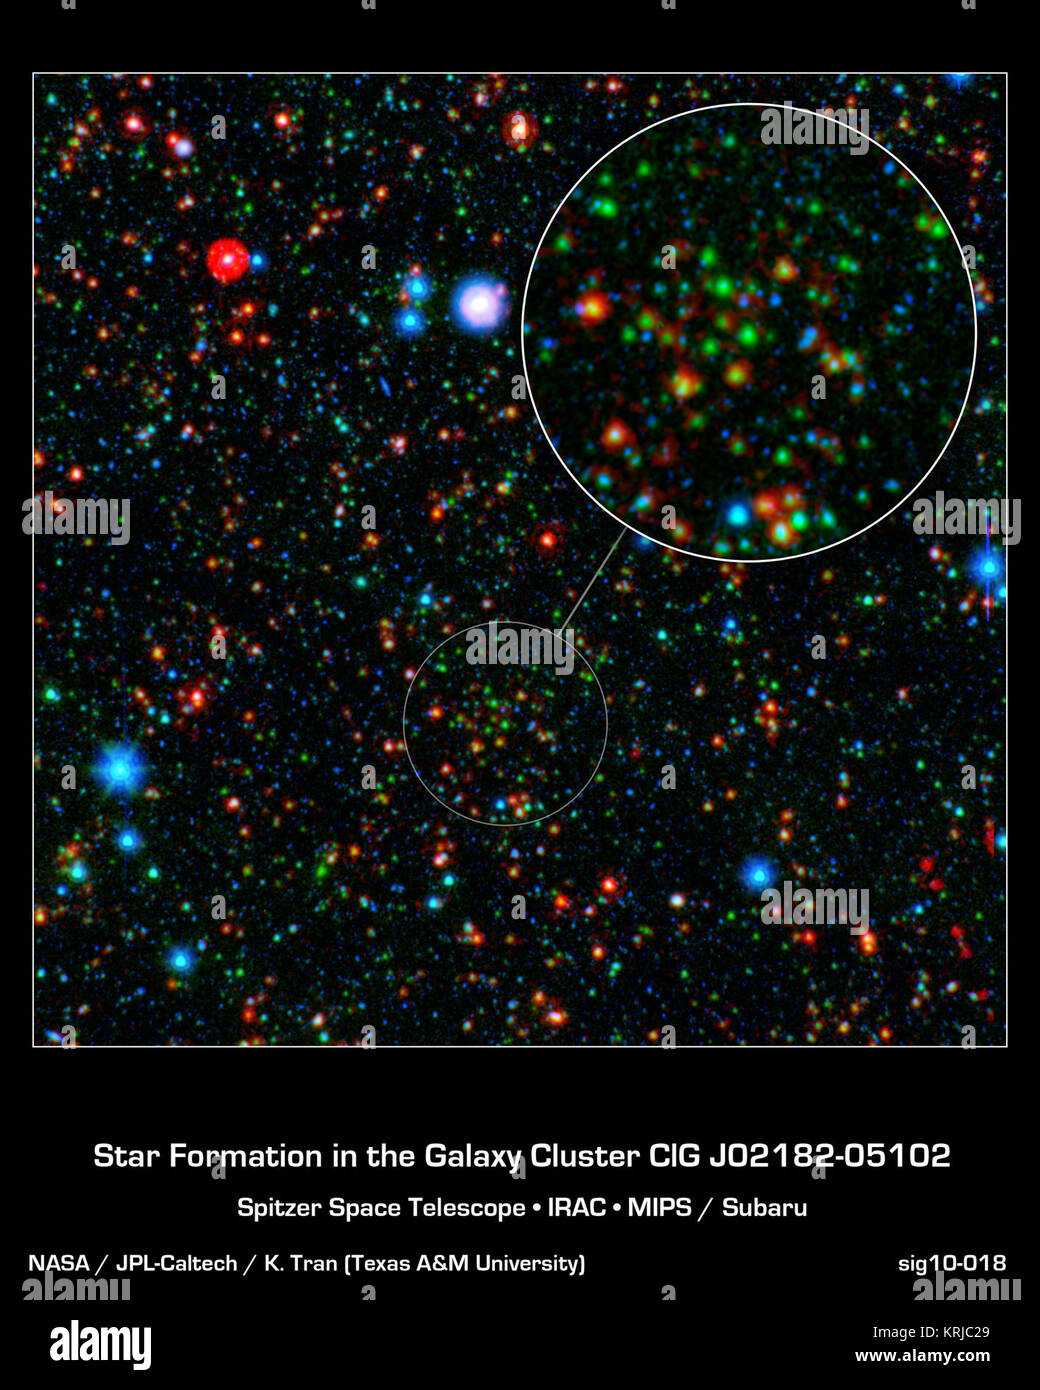 Astronomers have found that stars are forming more rapidly in the center of a distant galaxy cluster than at its edges, which is completely reversed from galaxy clusters seen in the local universe. This cluster, designated CLG J02182-05102, is shown in the call-out.  The image combines infrared light from NASA's Spitzer Space Telescope with visible light from Japan's Subaru telescope atop Mauna Kea, Hawaii. This sensitive exposure captures galaxies that are relatively local along side some that date back almost 10 billion years, soon after the Big Bang. The most distant galaxies stand out clea Stock Photo